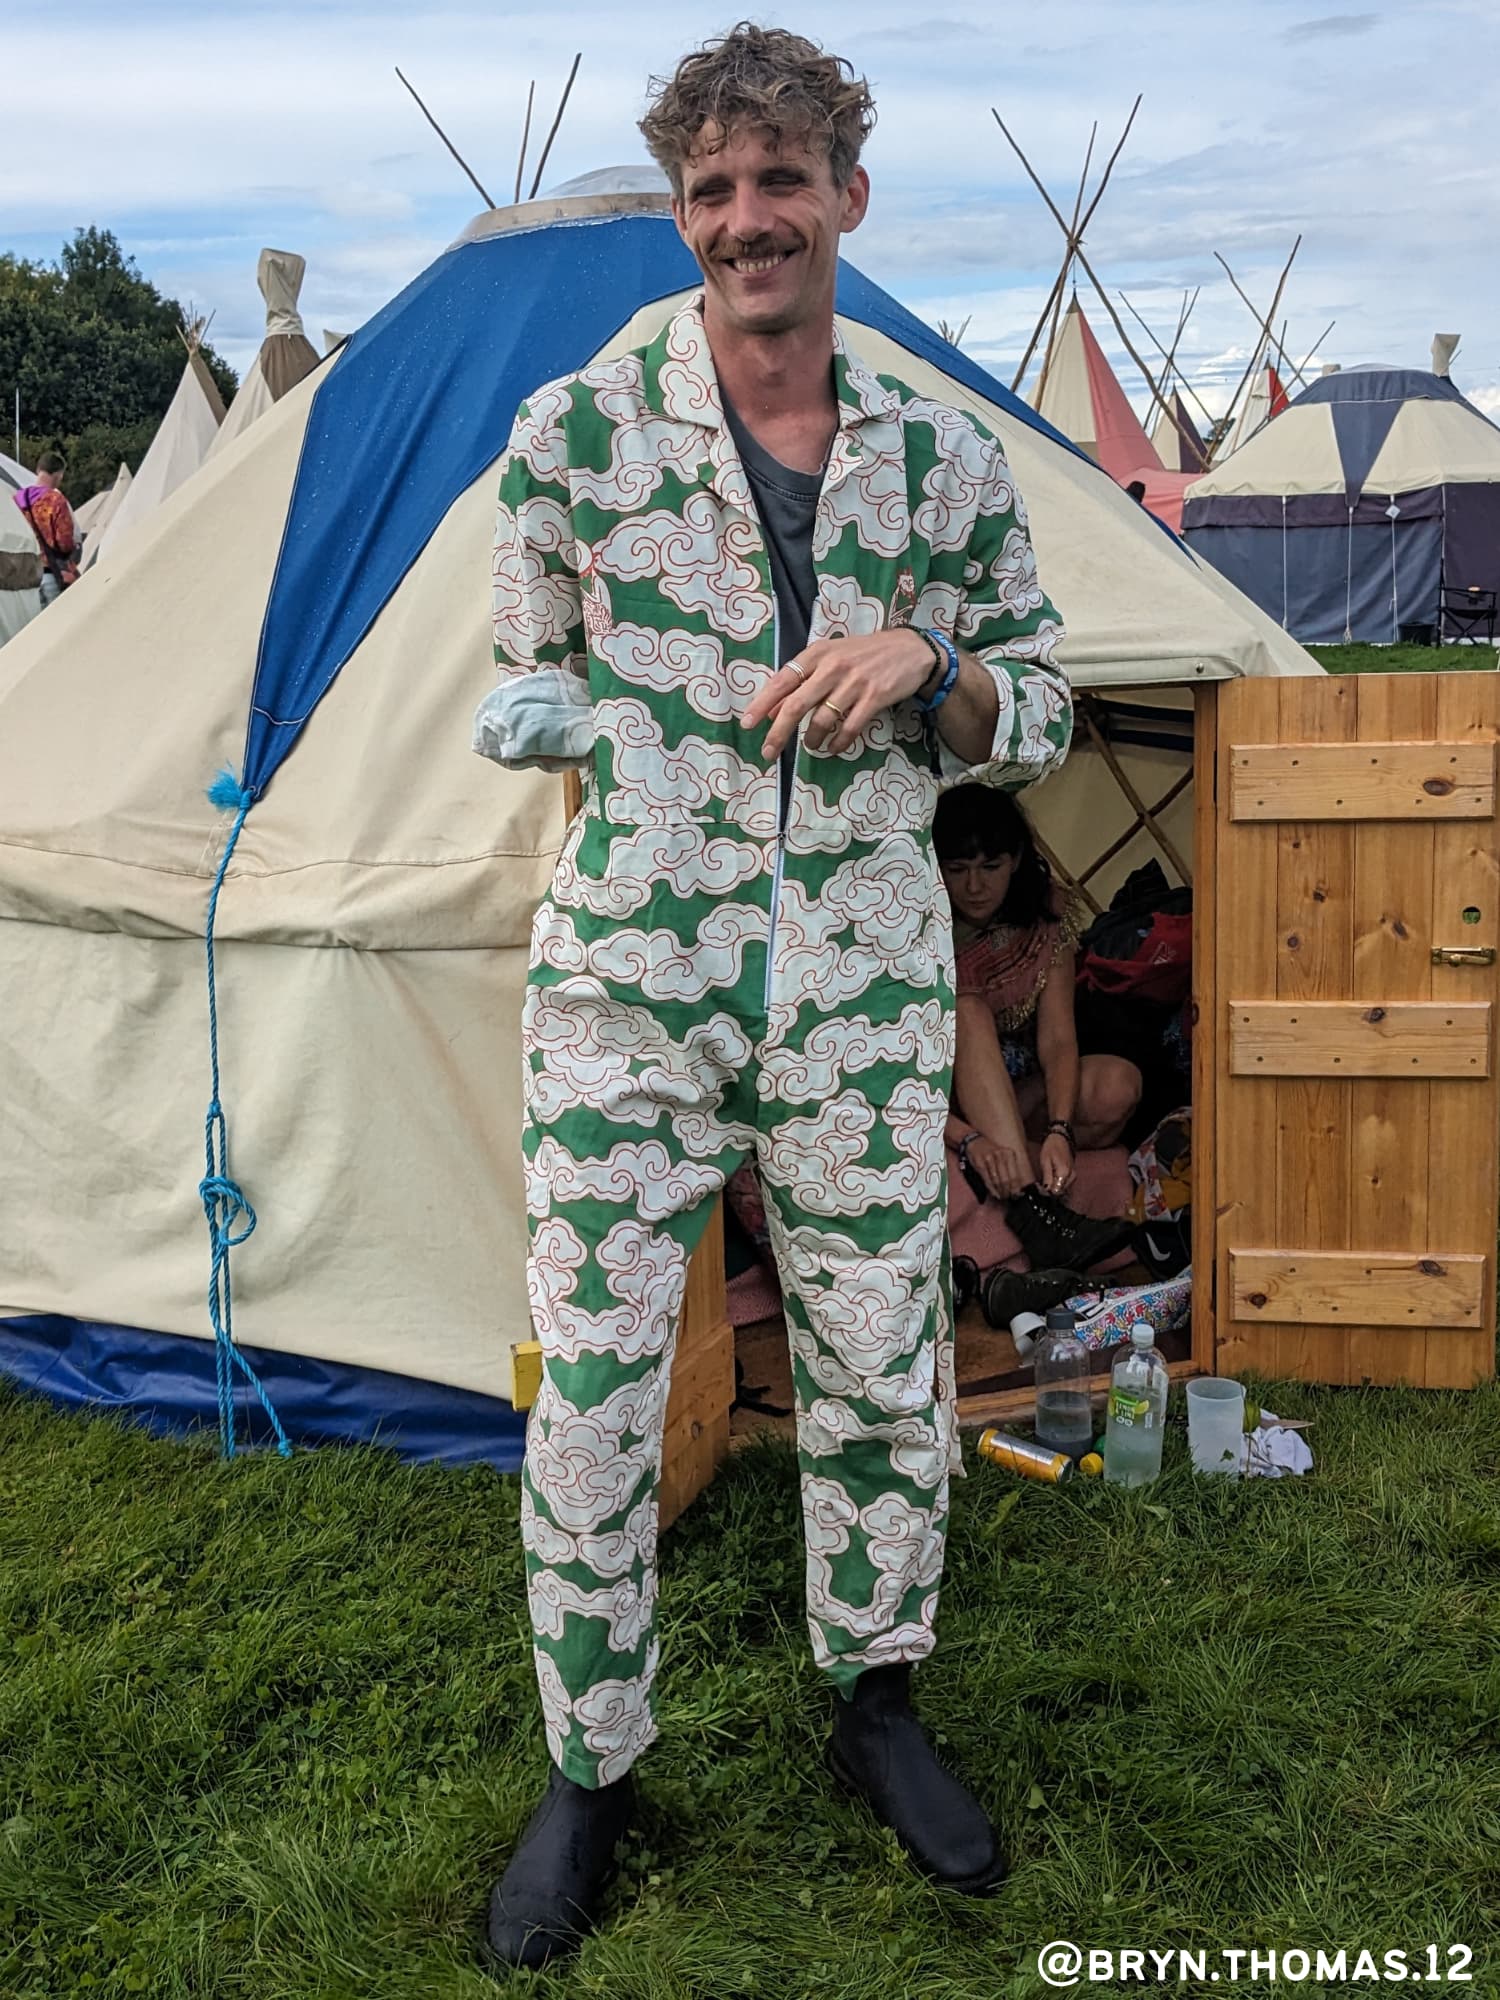 Man wears Green Clouds Jumpsuit by Wild Clouds at a festival